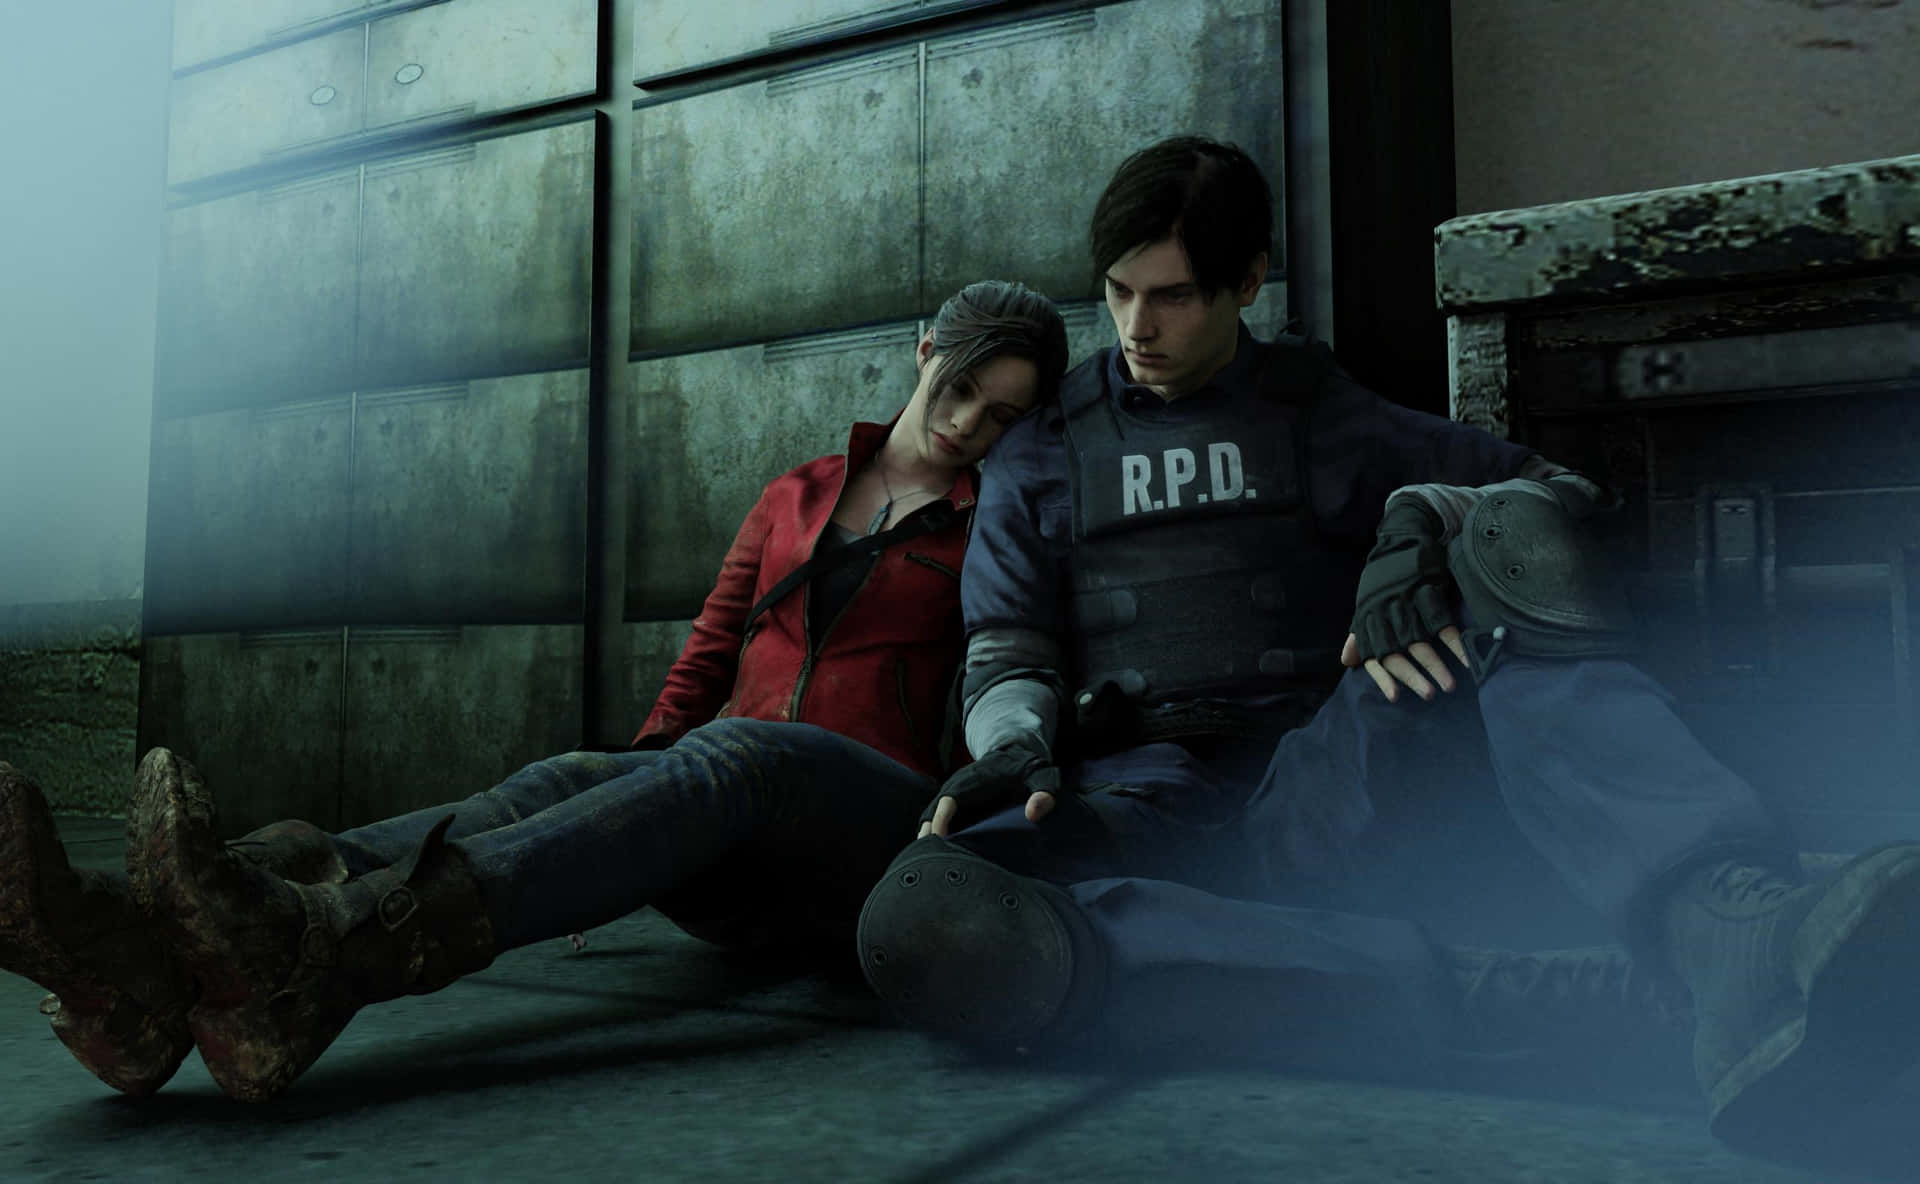 Claire Redfield, a heroine in the Resident Evil 2 video game series Wallpaper